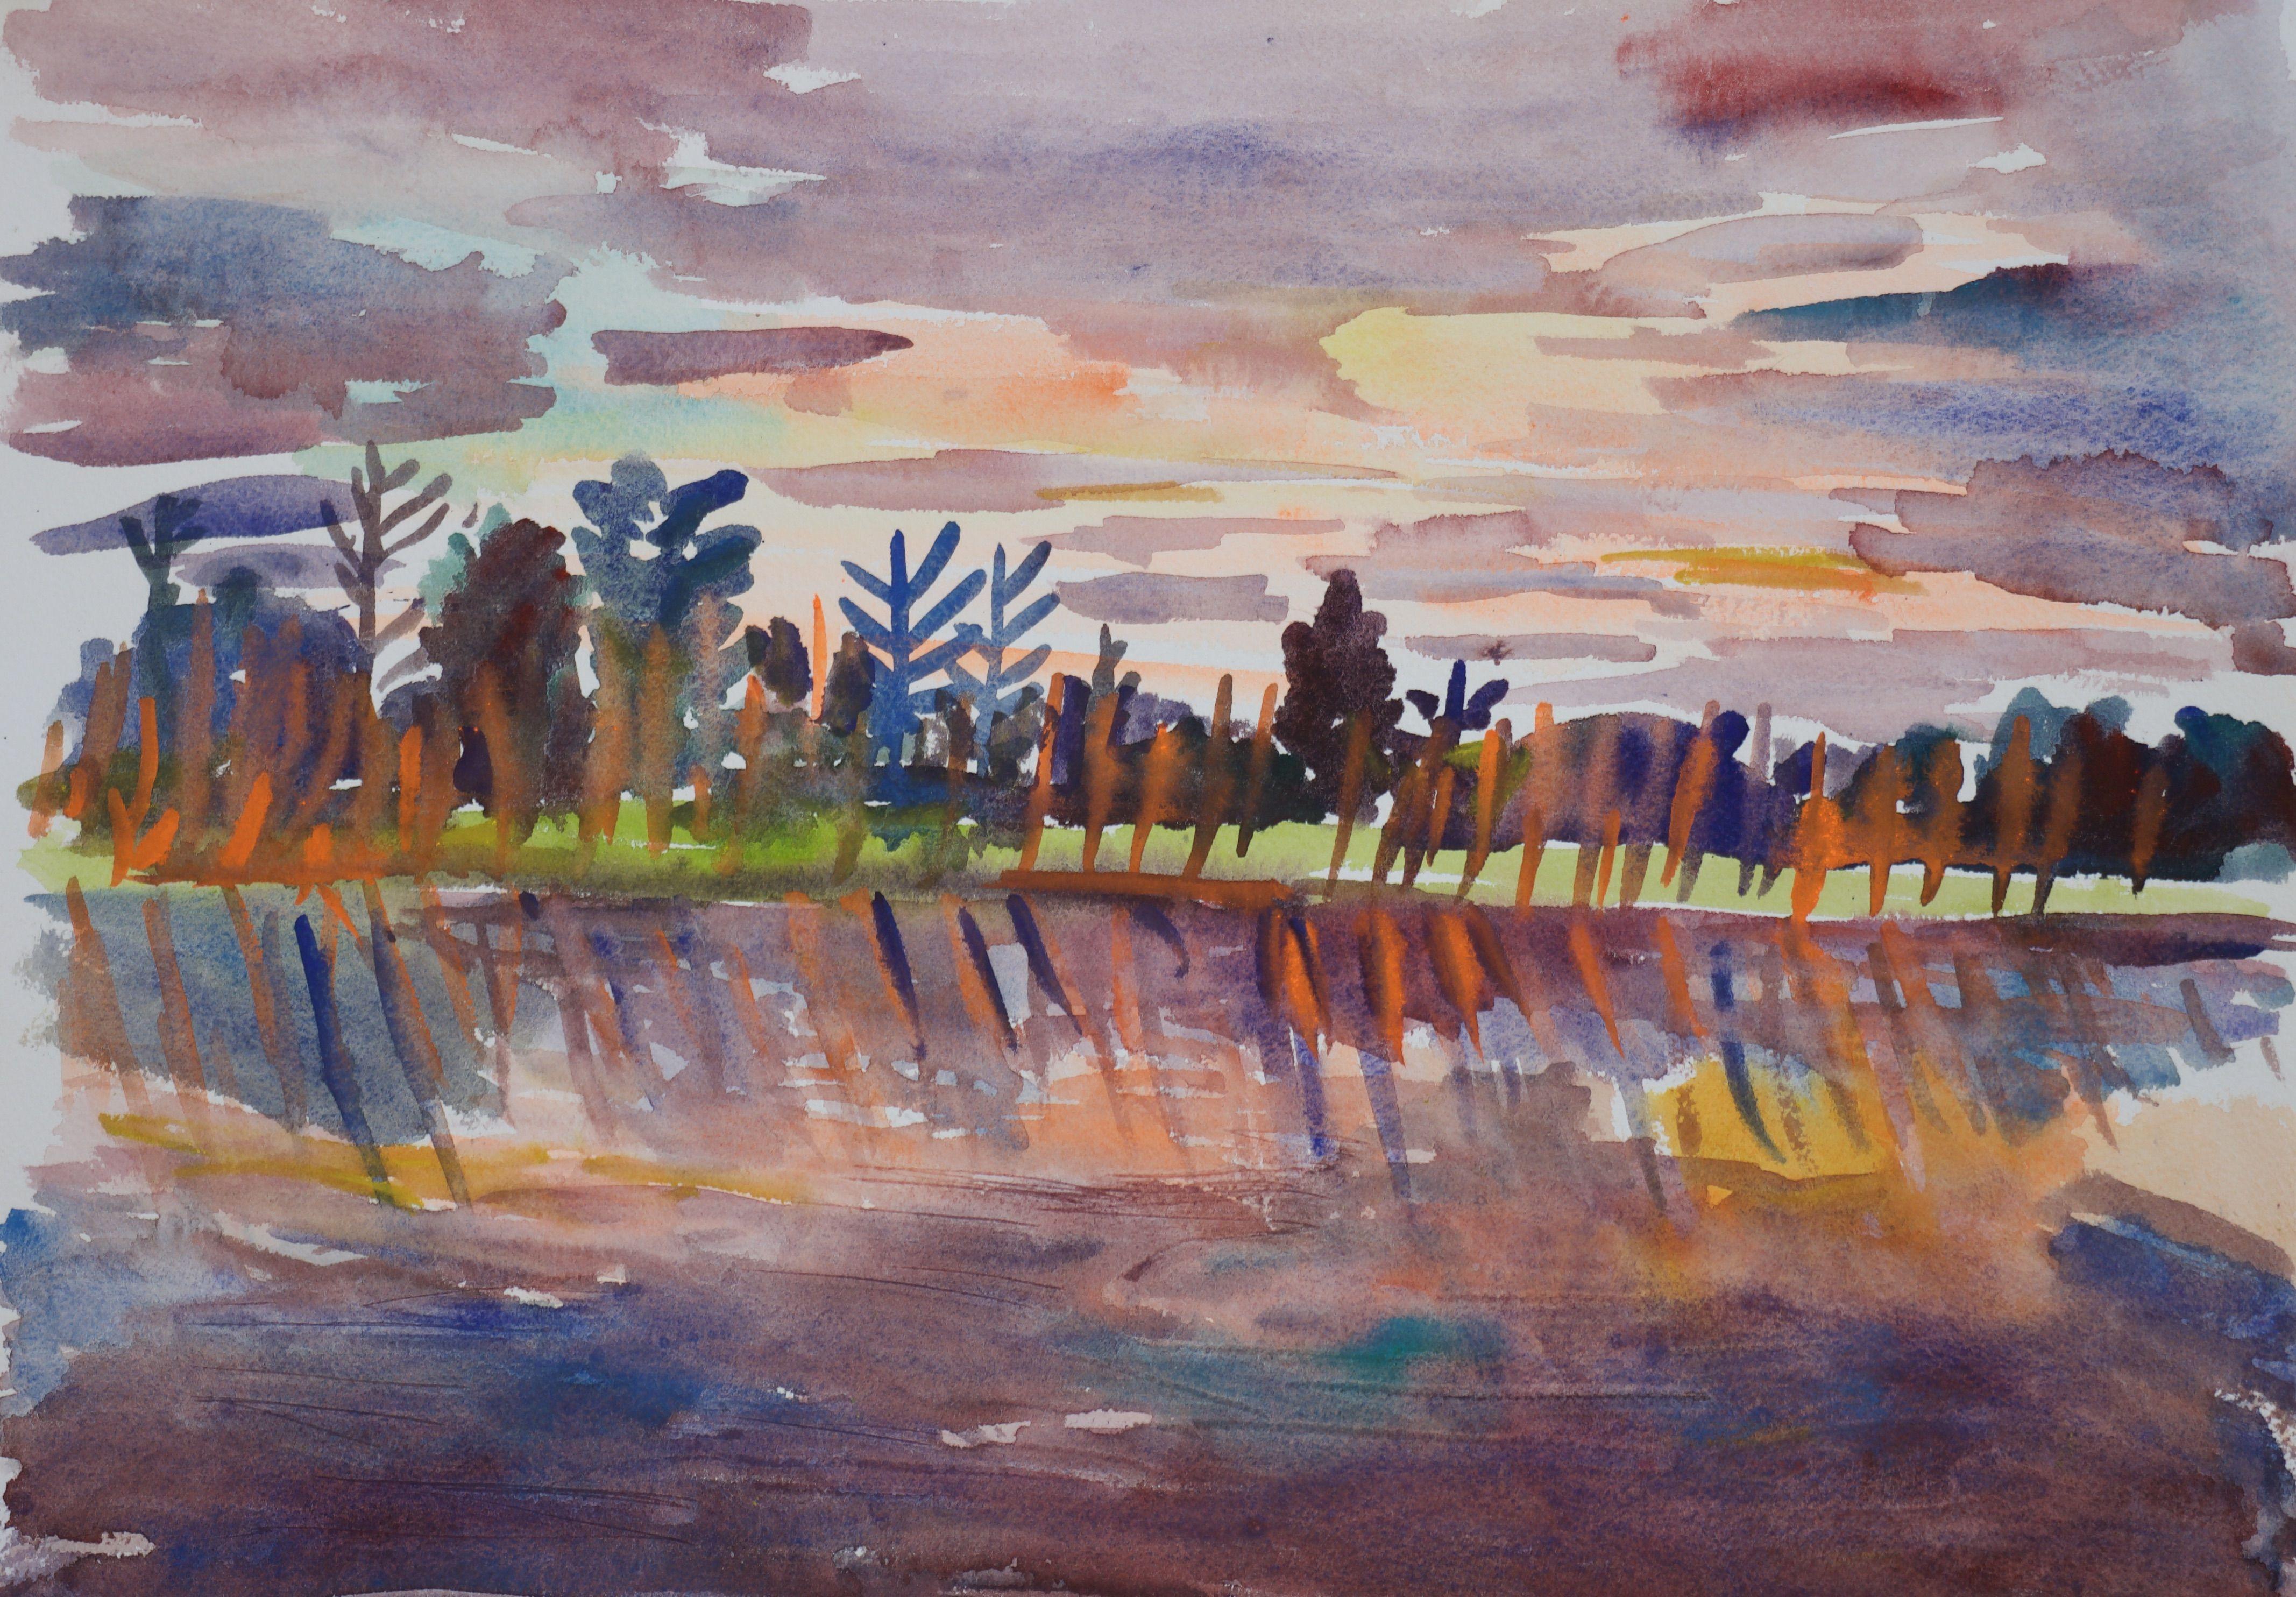 Ox-Bow Sunset, Painting, Watercolor on Watercolor Paper - Art by John Kilduff